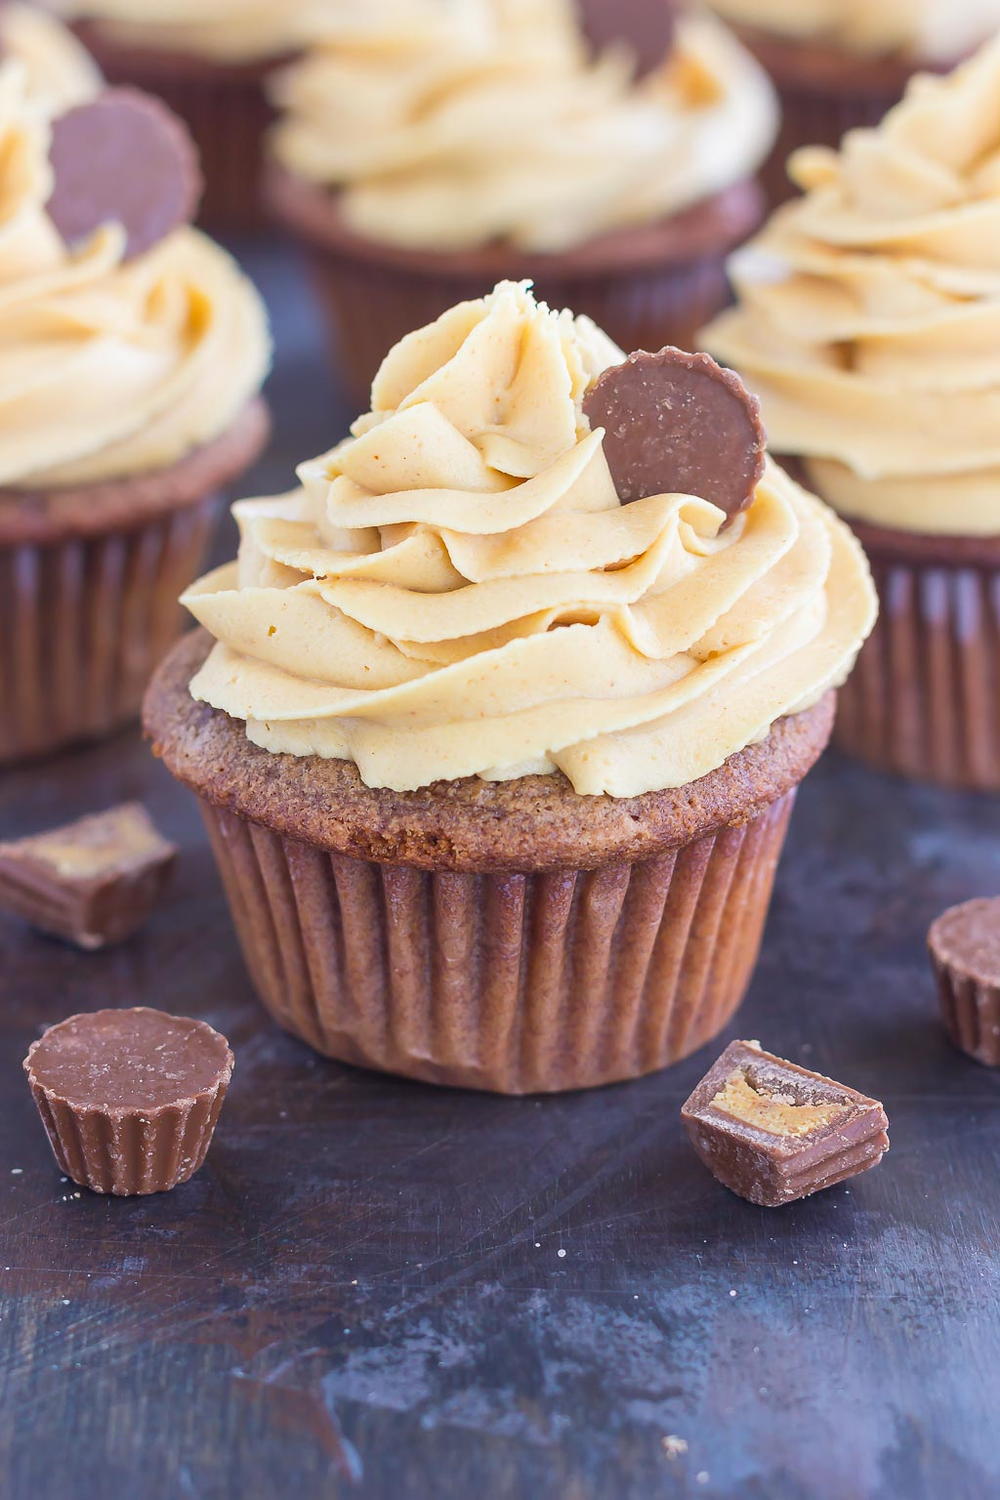 Chocolate Cupcake with Peanut Butter Frosting | FaveSouthernRecipes.com